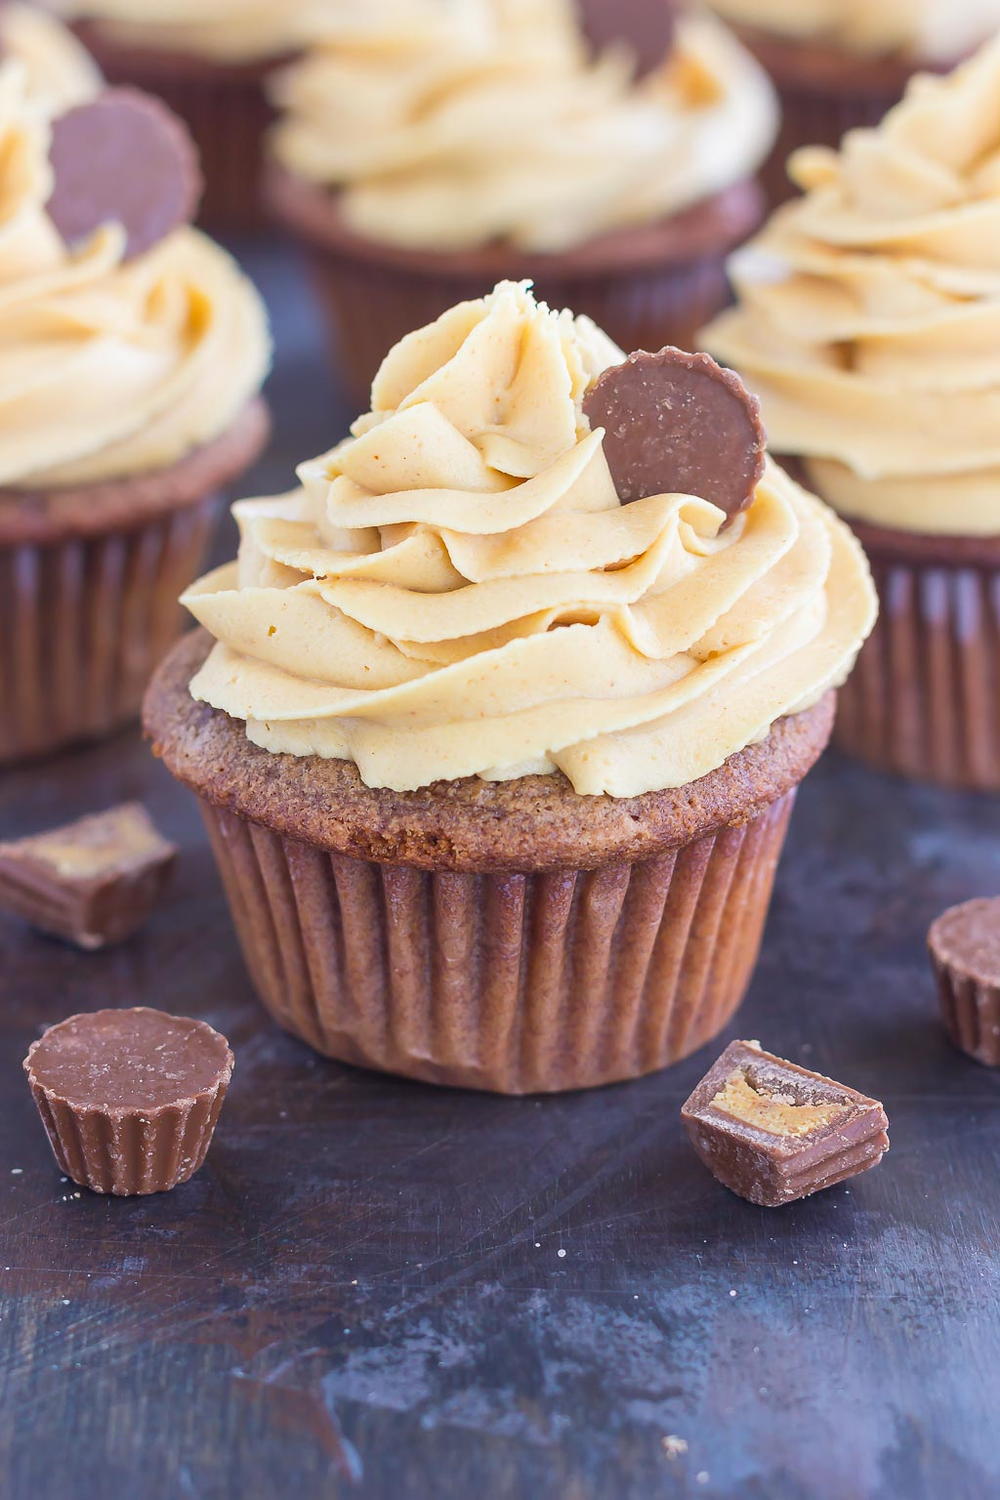 Chocolate Cupcake with Peanut Butter Frosting | FaveSouthernRecipes.com